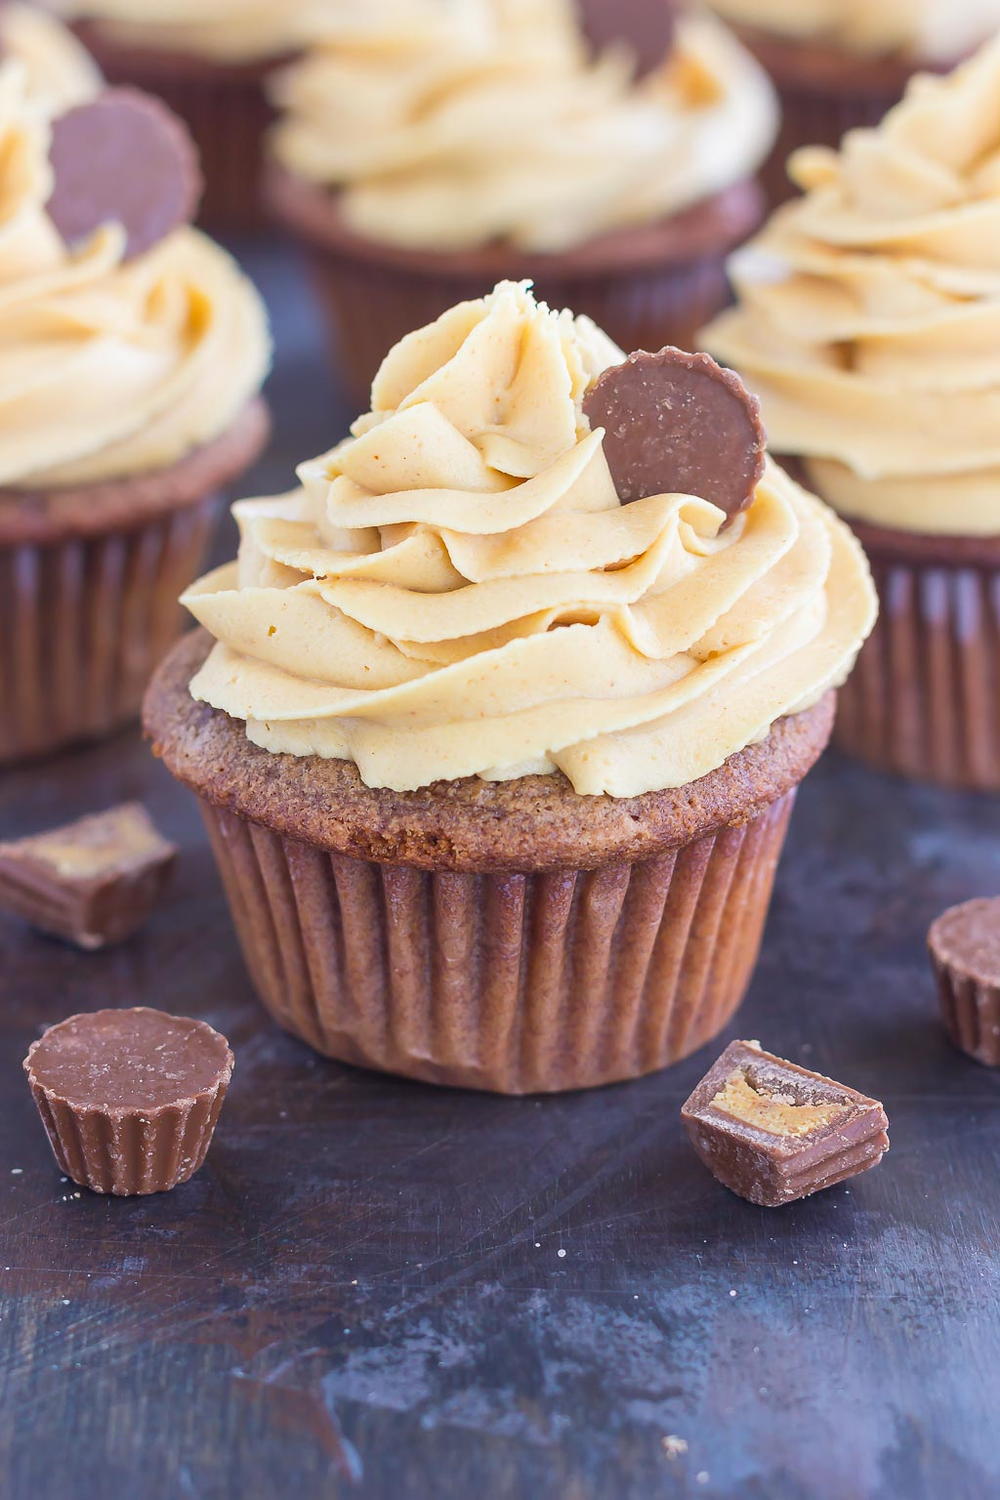 Chocolate Cupcake with Peanut Butter Frosting | FaveSouthernRecipes.com